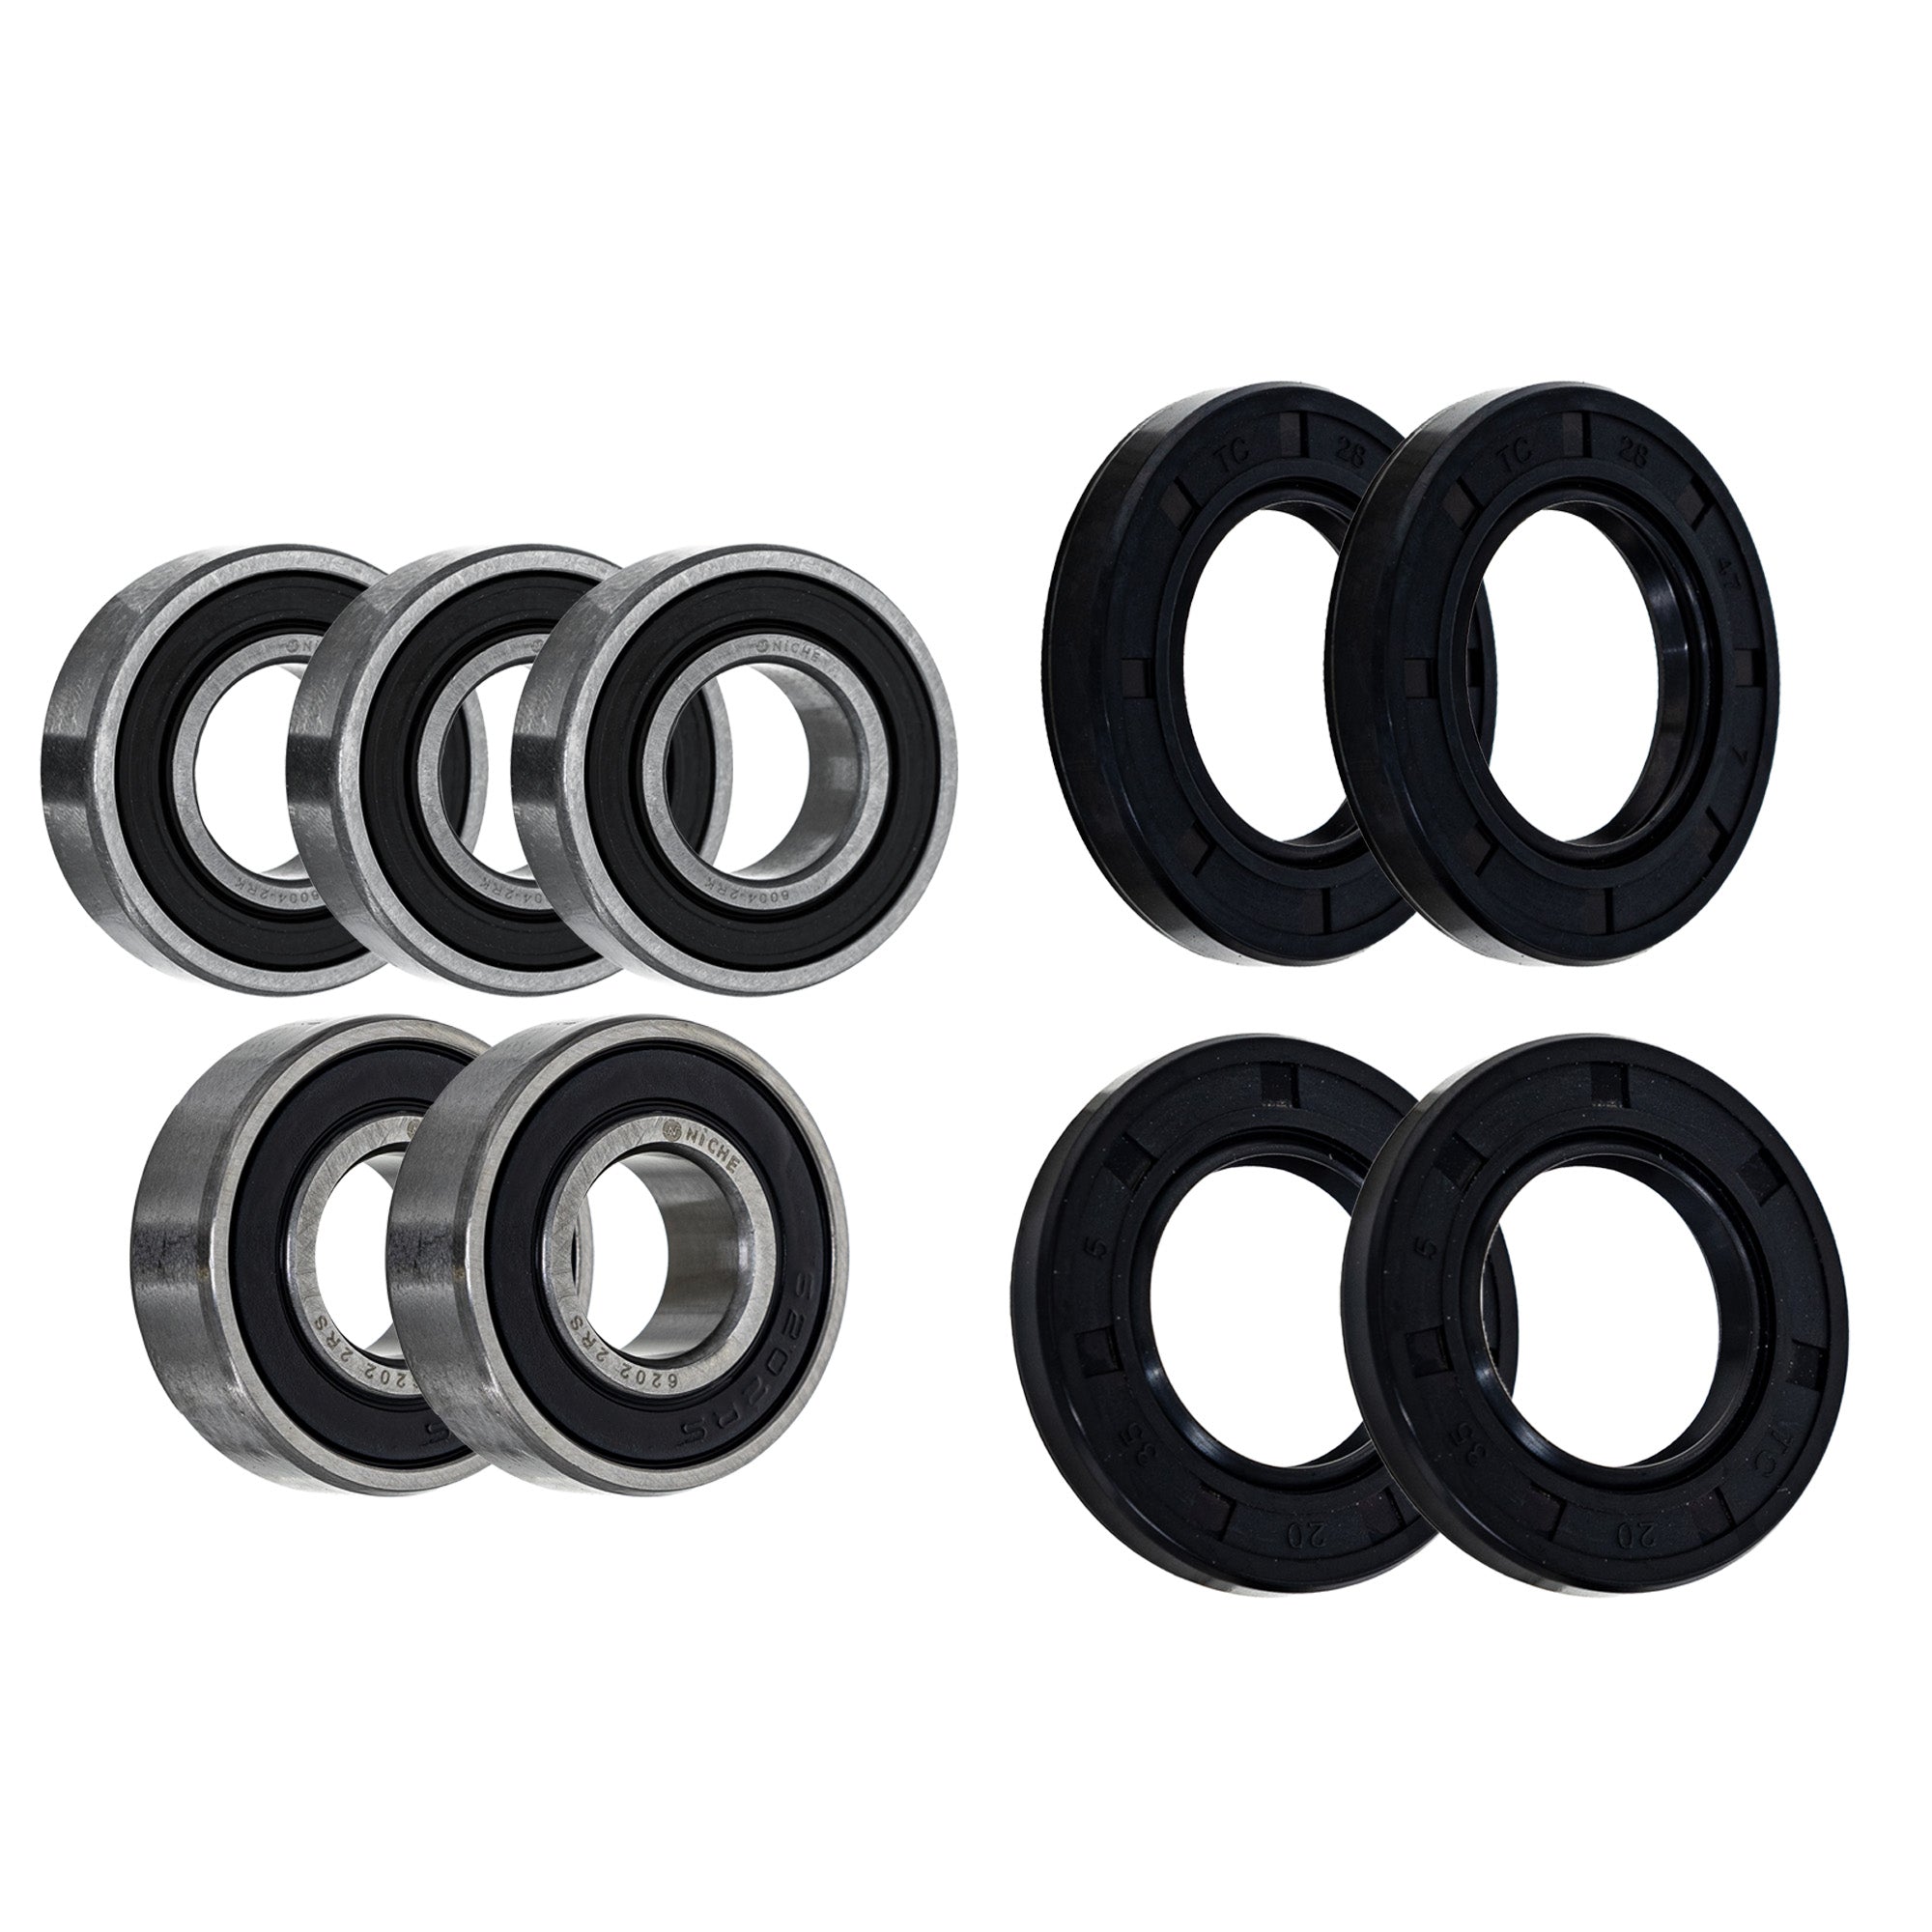 Wheel Bearing Seal Kit for zOTHER Ref No YZ250WR YZ250 YZ125 WR250 NICHE MK1008706